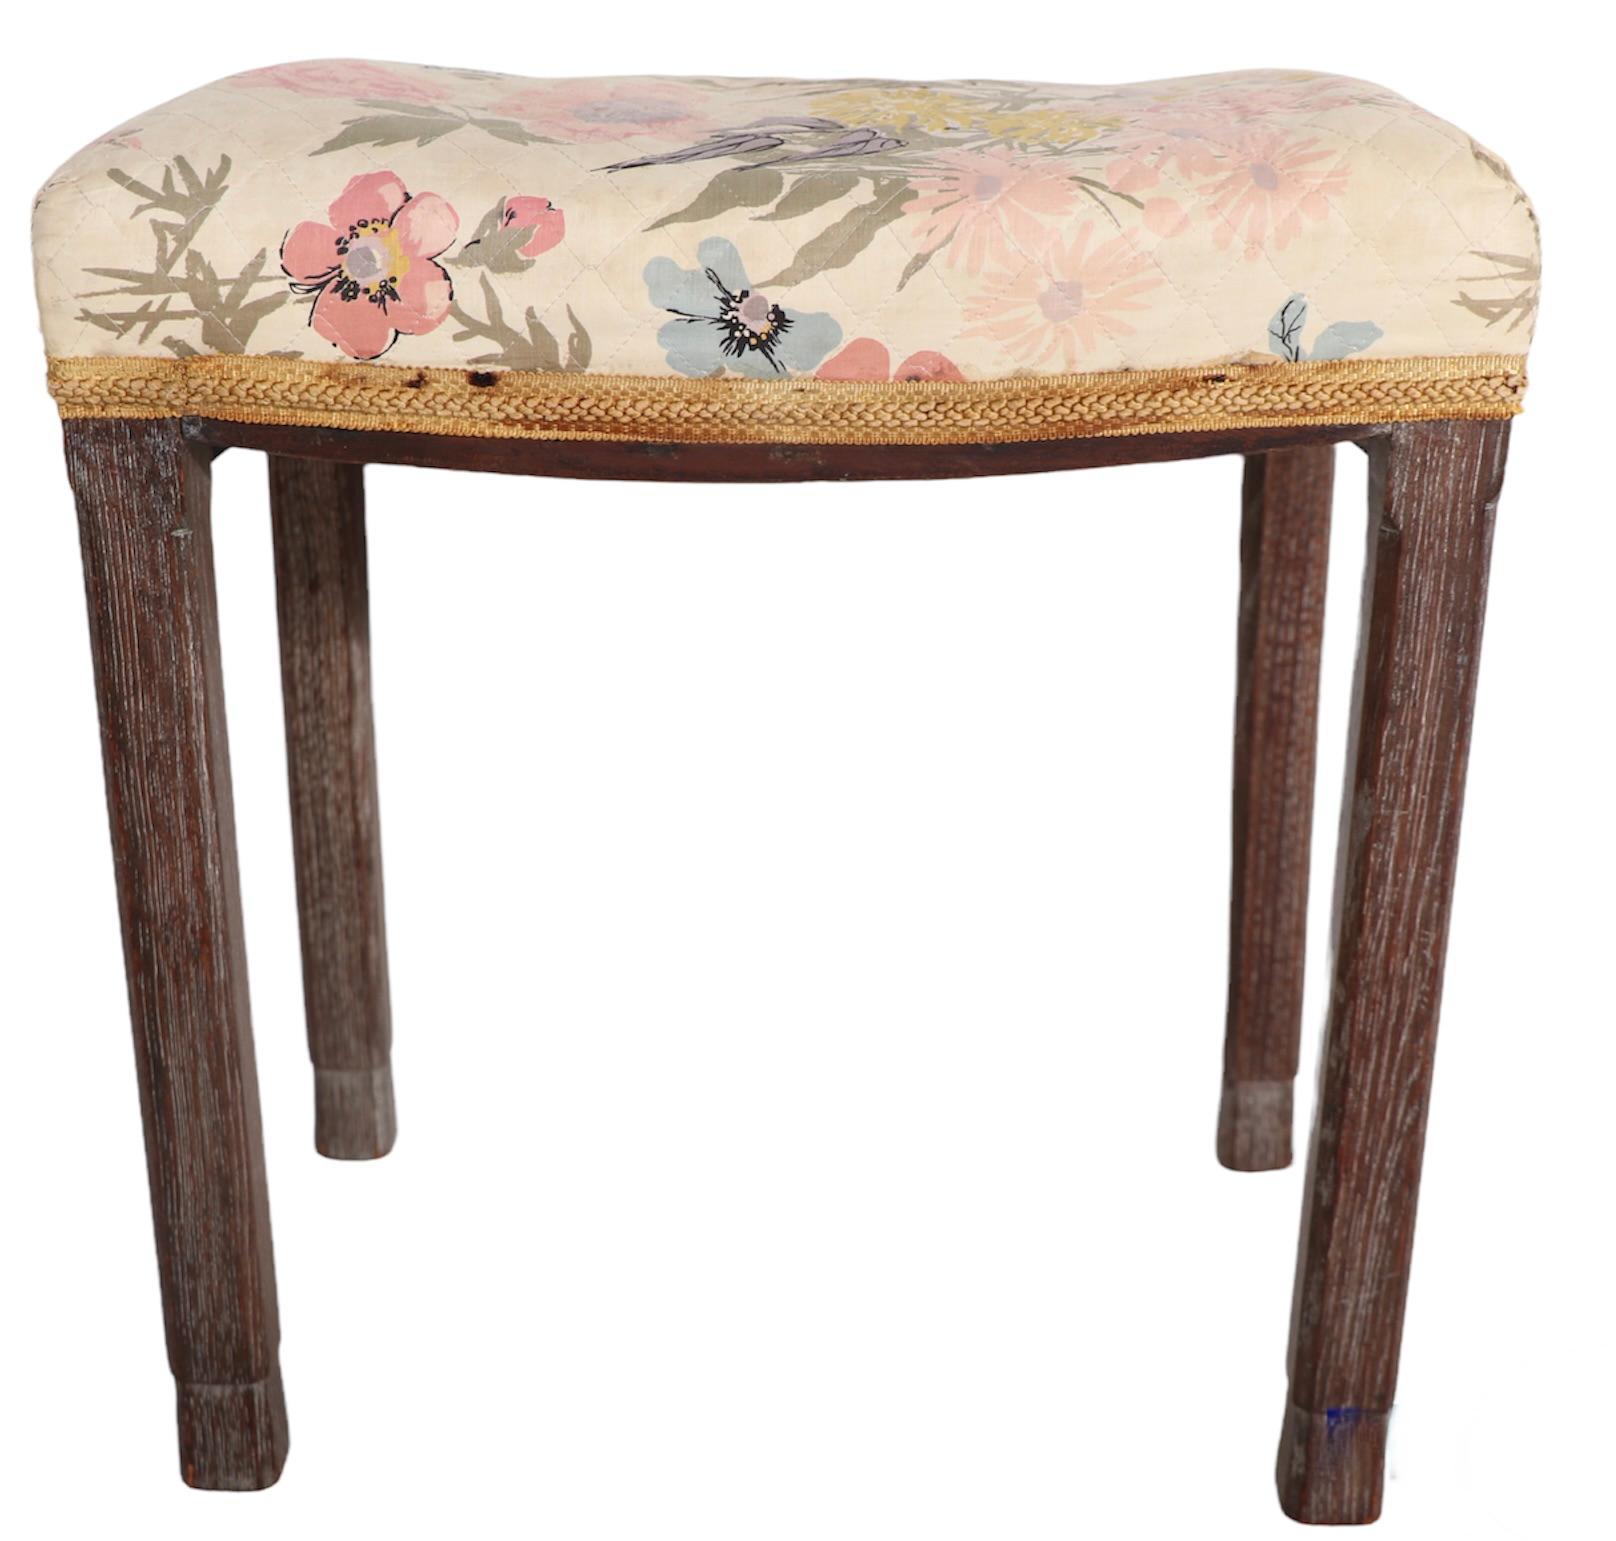 Art Deco King George VI Coronation Stool in Cerused Oak Ca 1937 Made in England For Sale